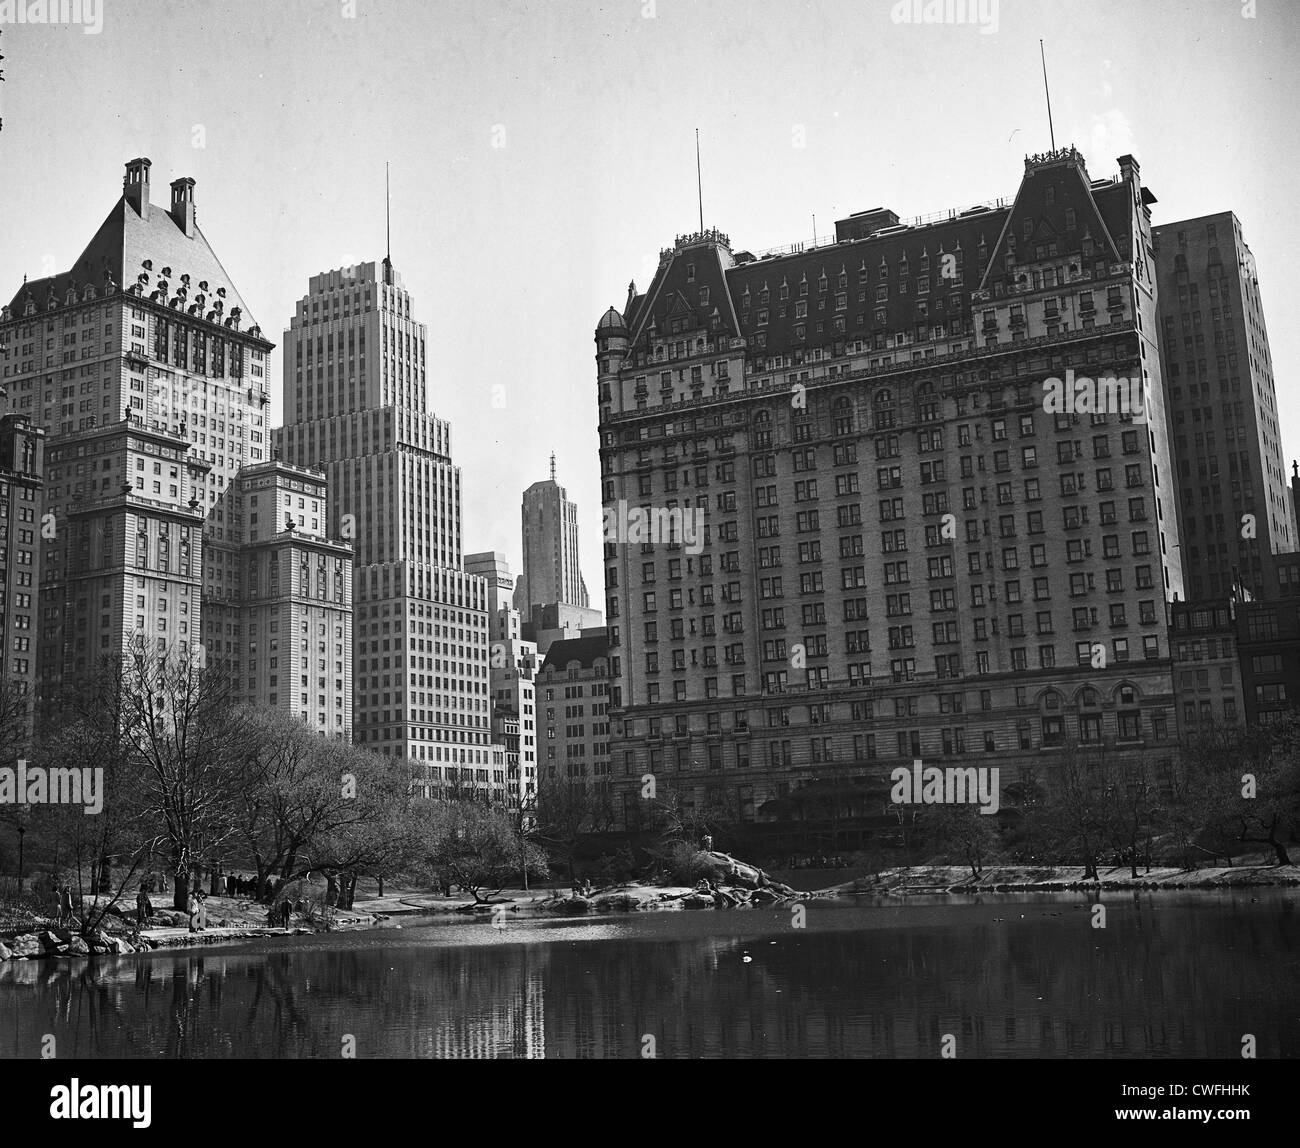 Hotel plaza from central park Black and White Stock Photos & Images - Alamy